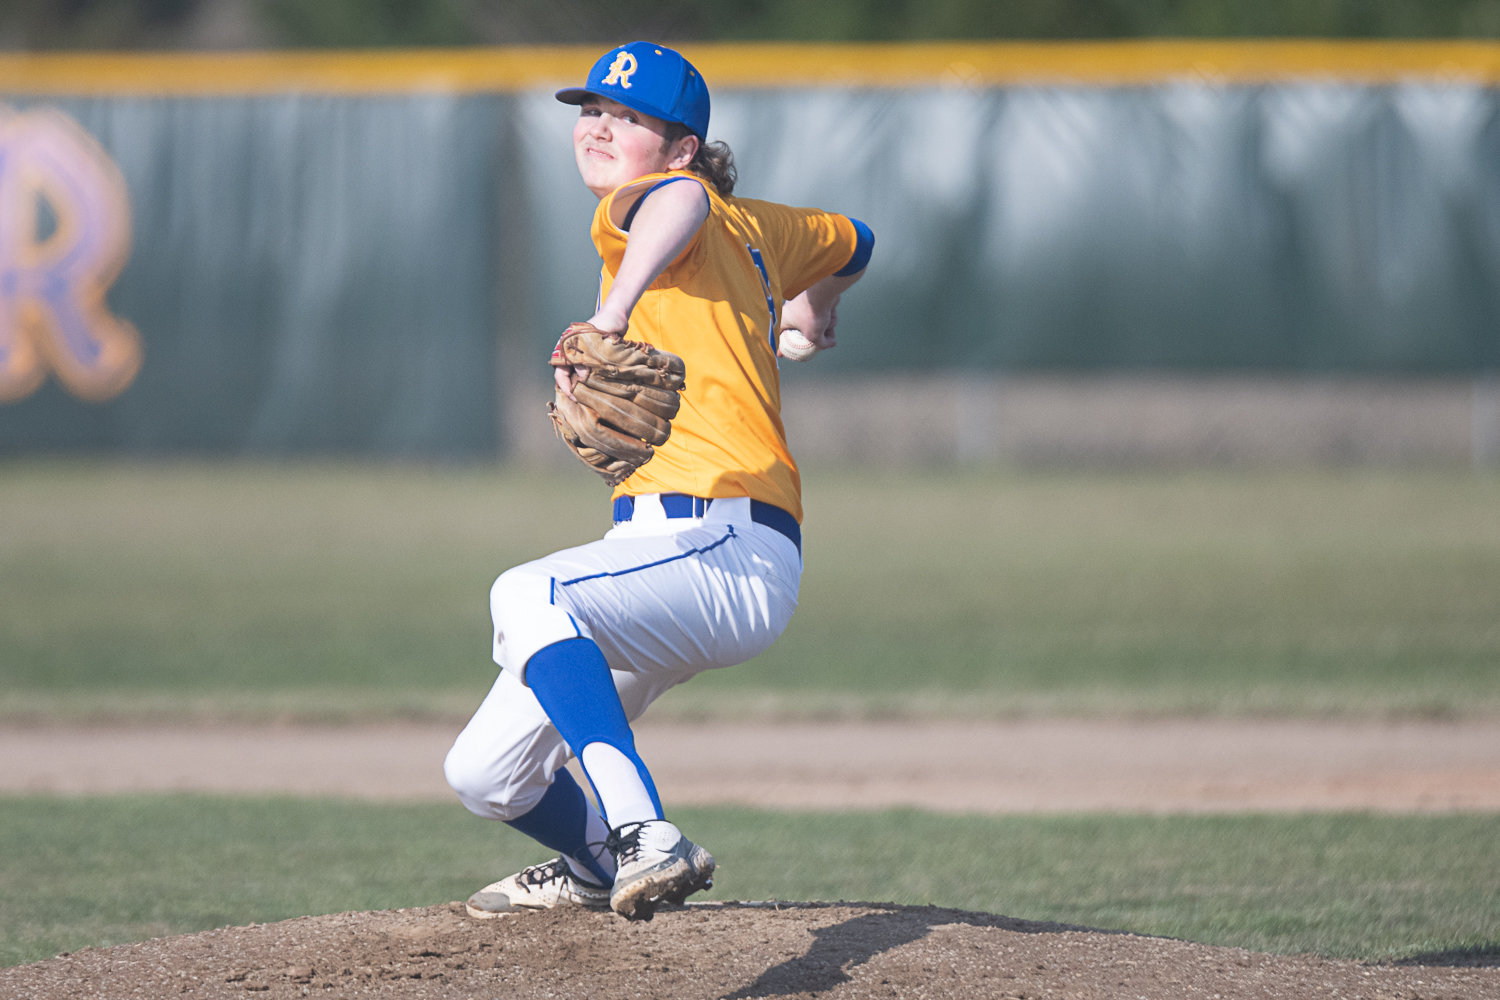 Hyde Parrish throws a pitch in the first inning of Rochester's 15-6 win over R.A. Long on March 16.